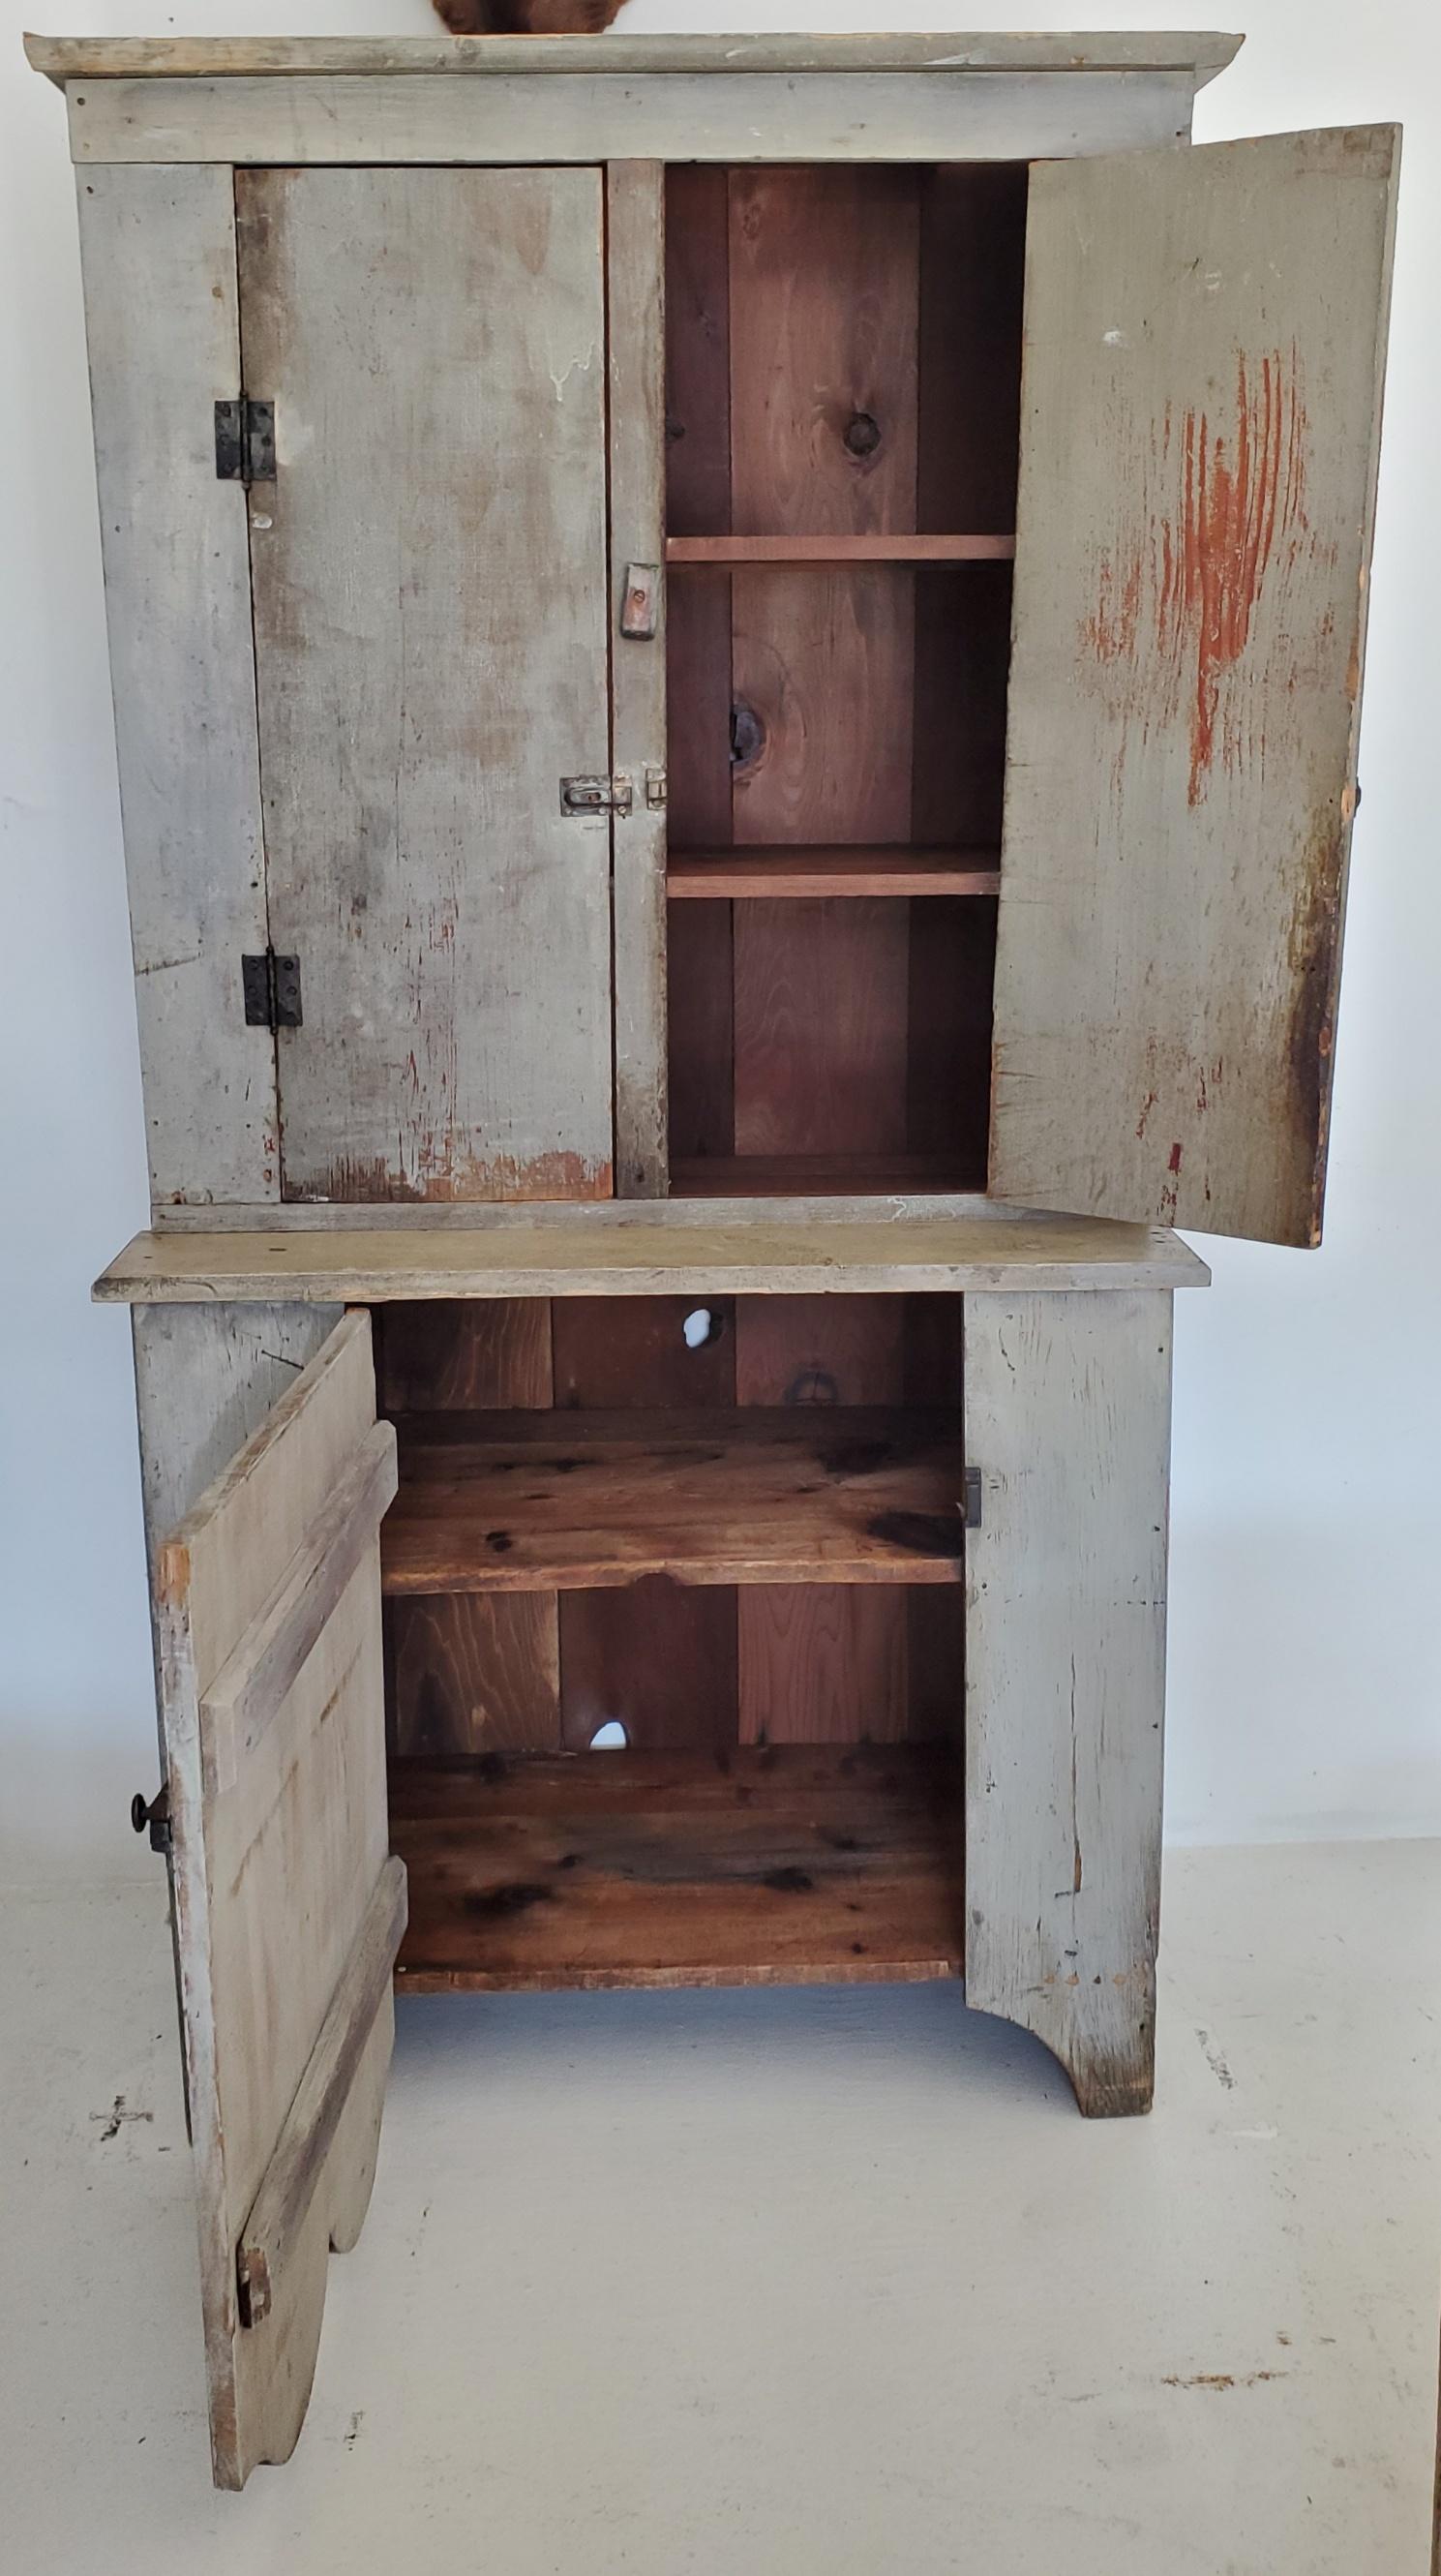 19thc original blue painted wall cupboard from Tennessee. The hardware is all original and looks straight off the farm. Condition is good with wear to the paint and edges.